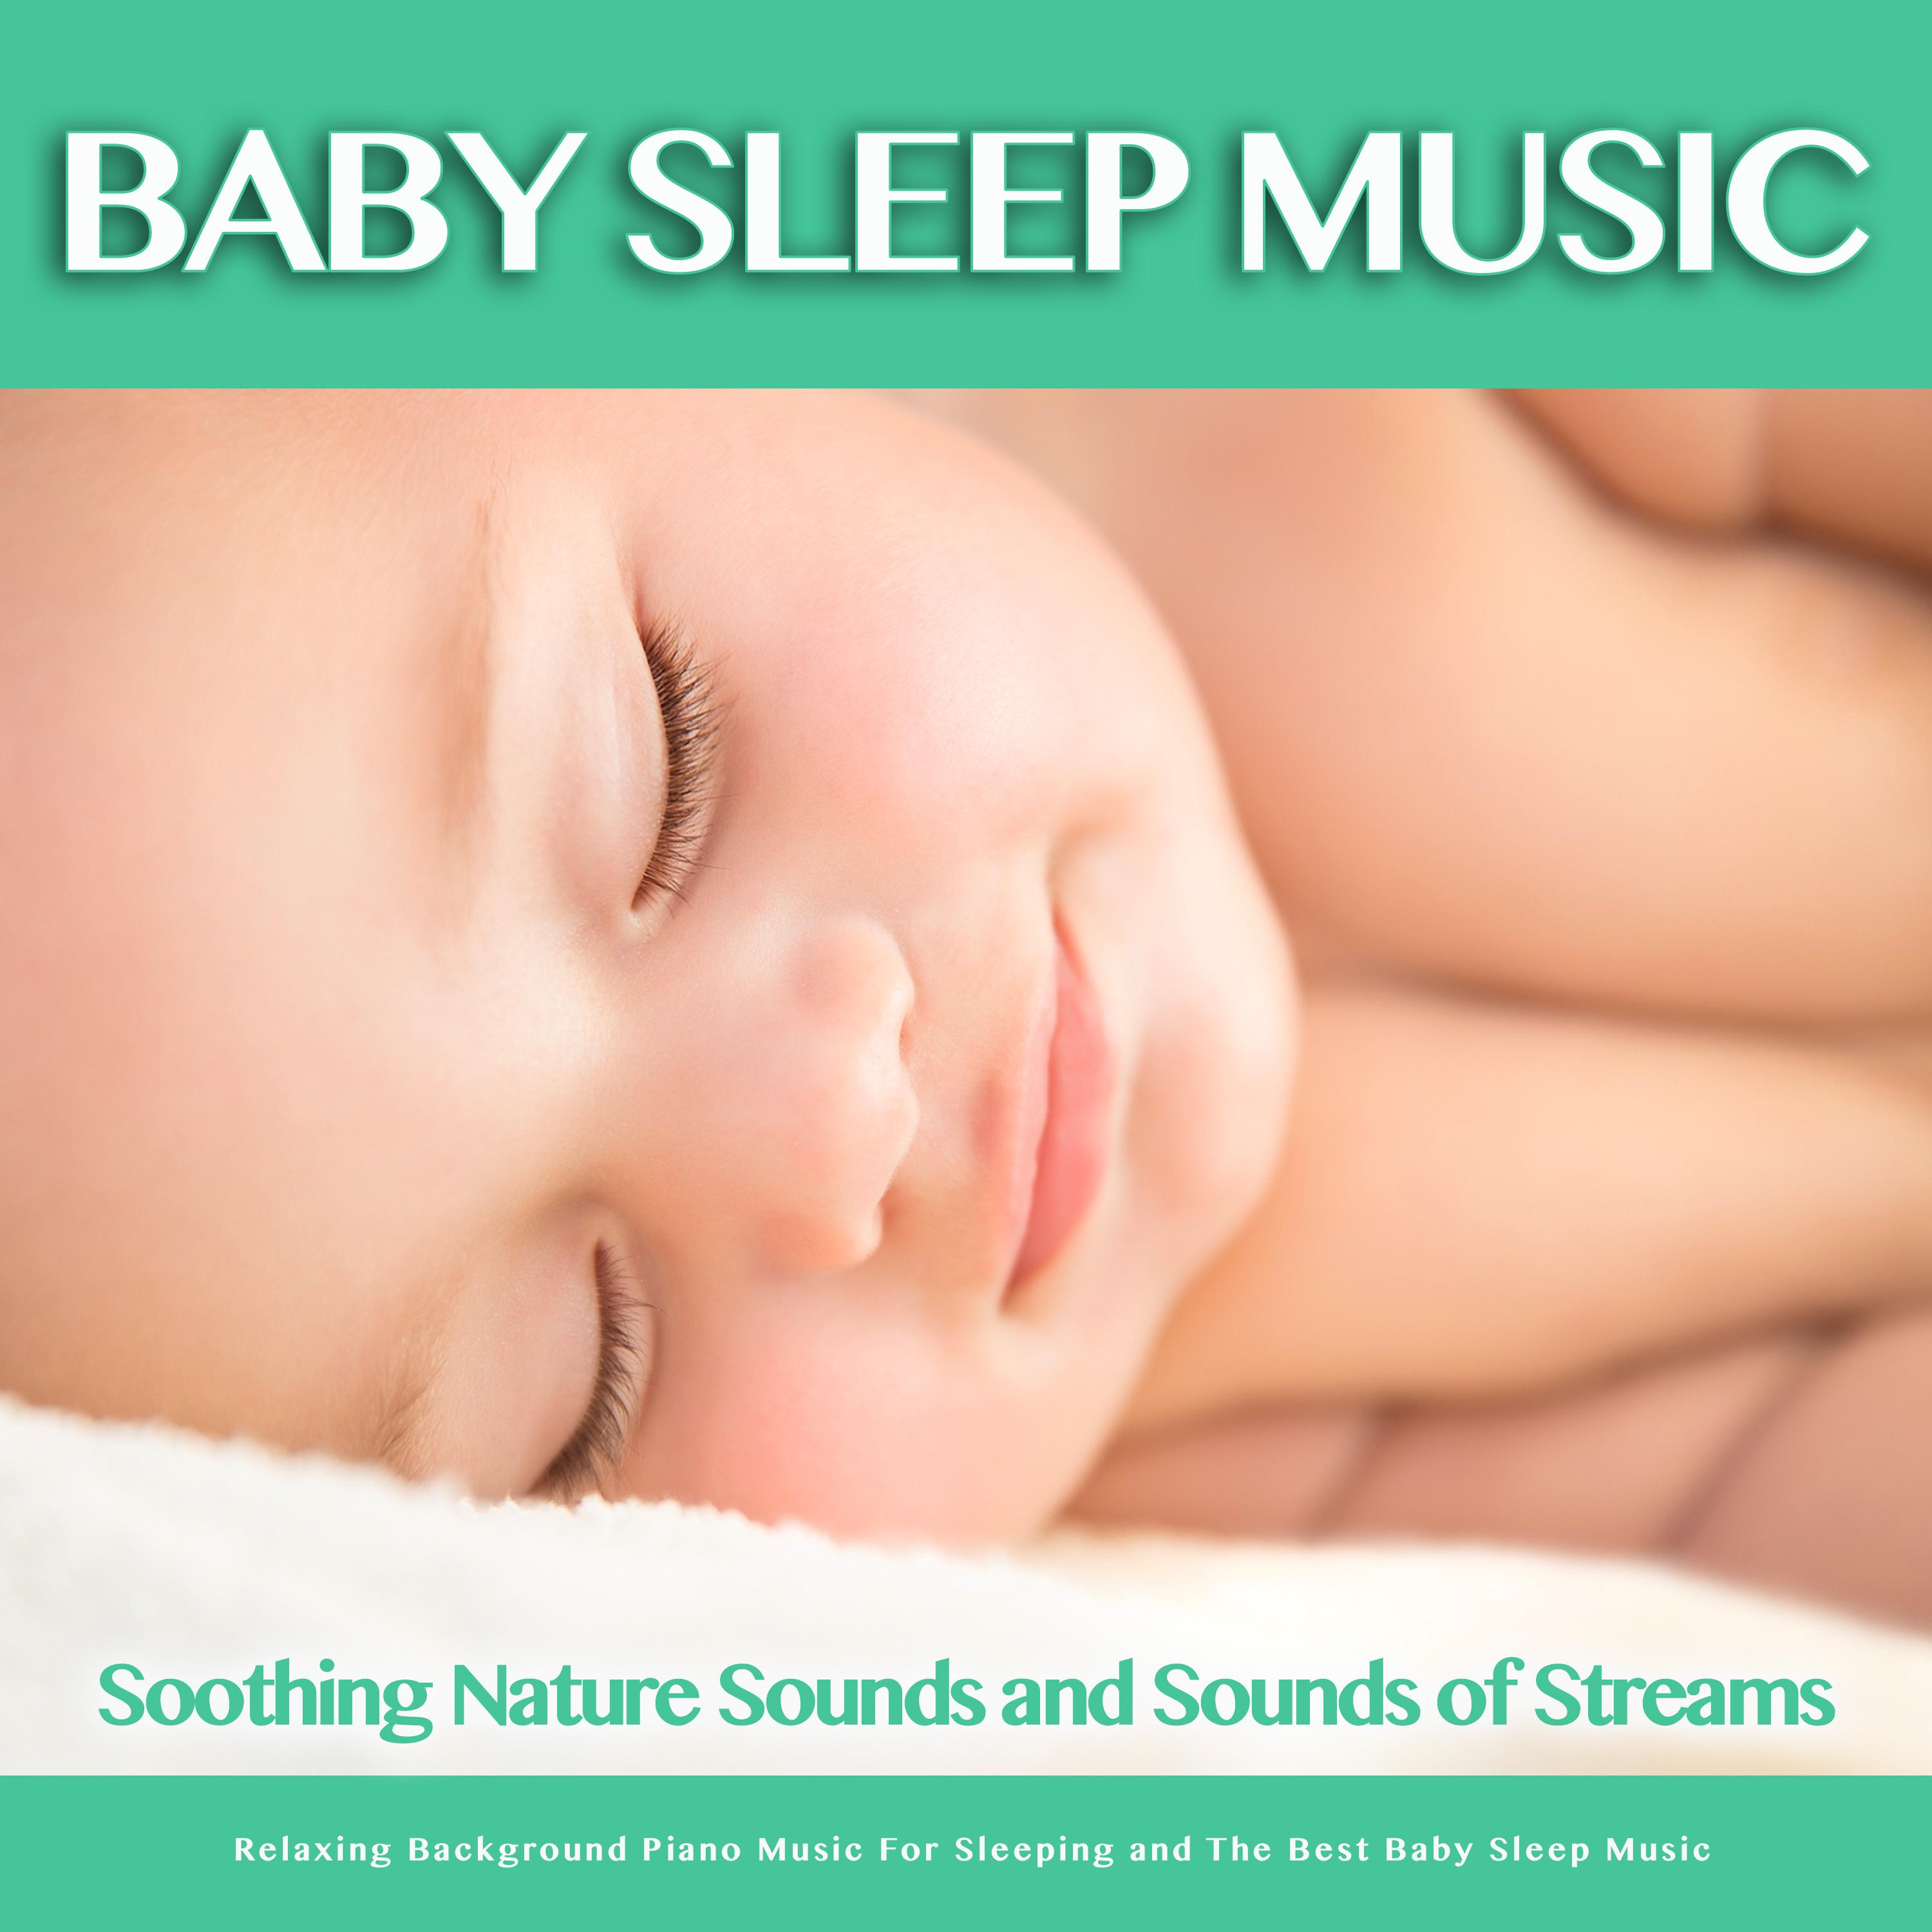 Sounds of a Stream and Baby Lullaby